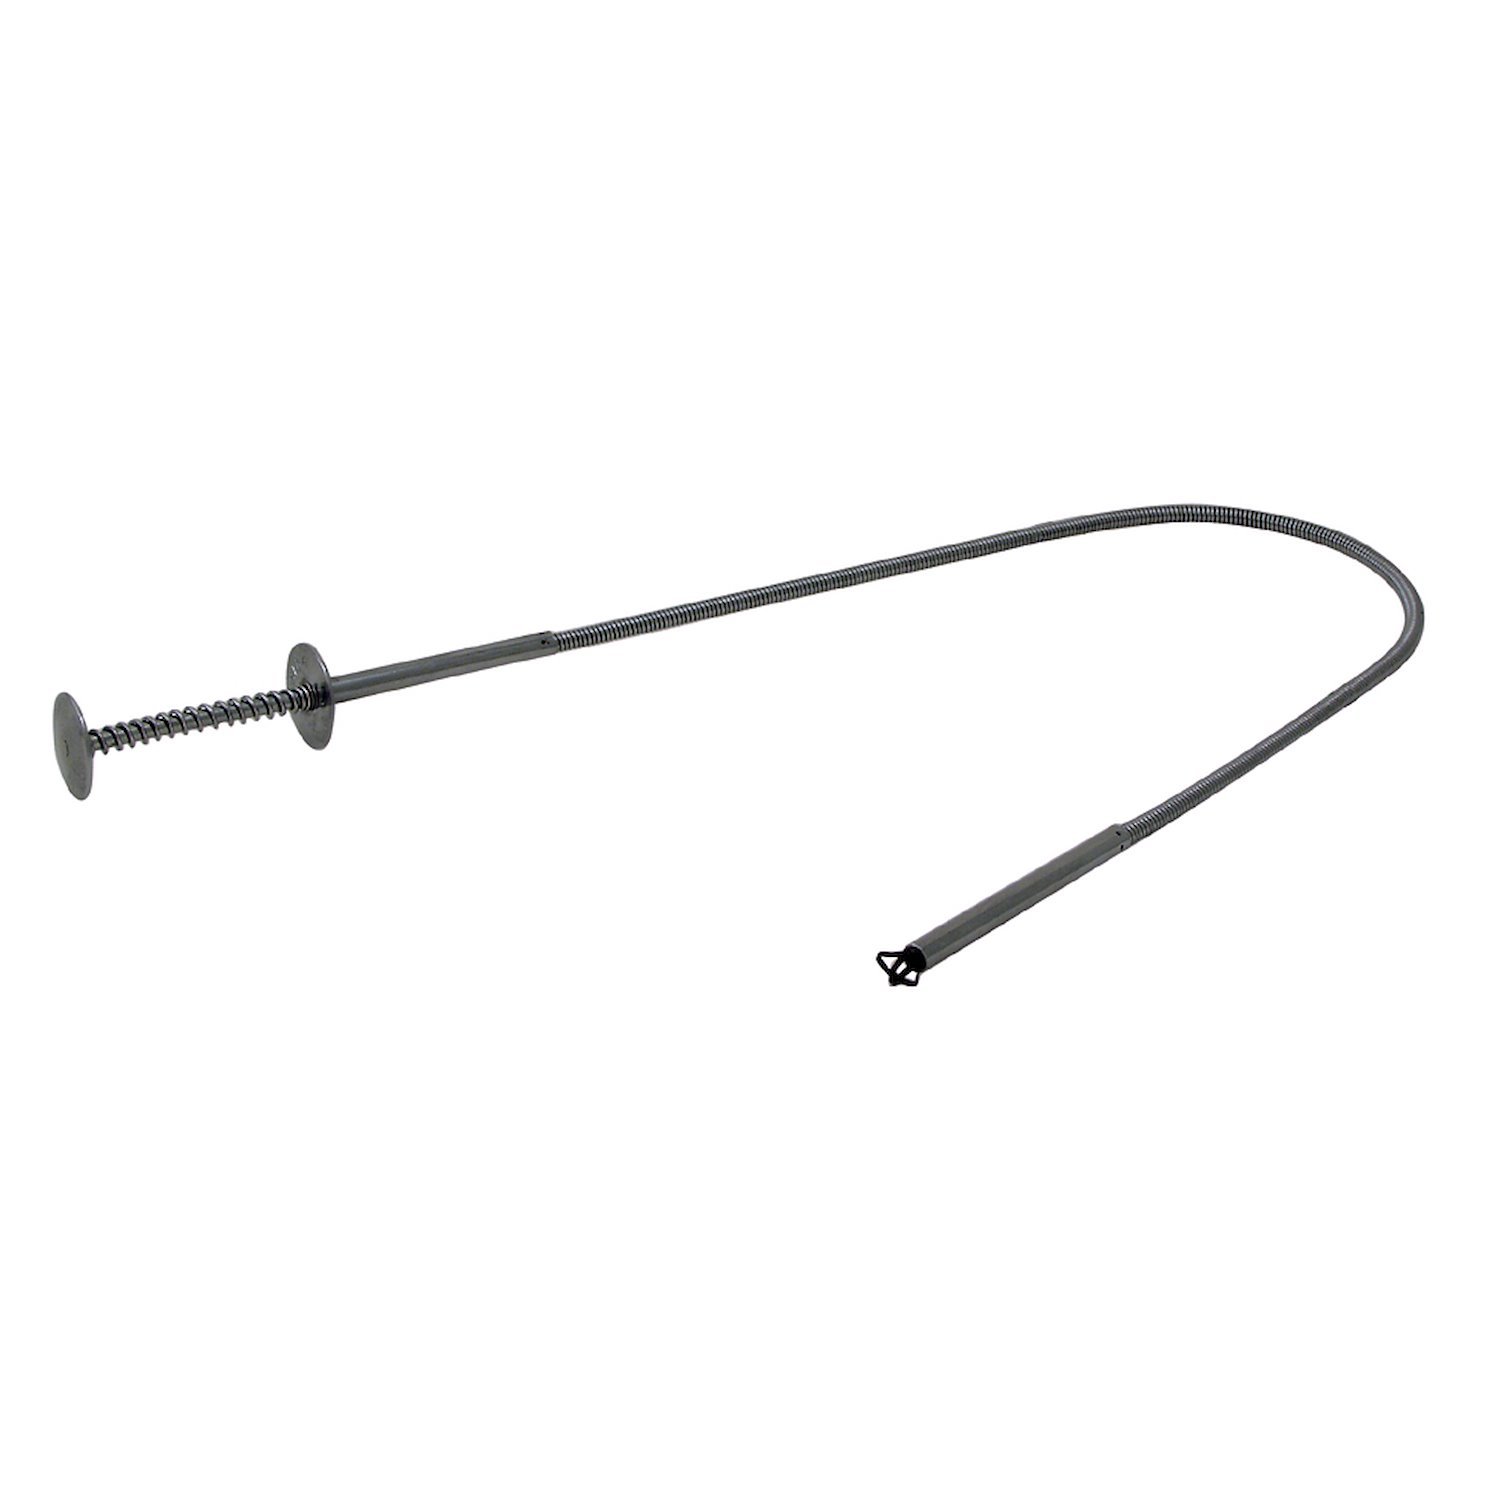 Four Claw Pick-Up Tool